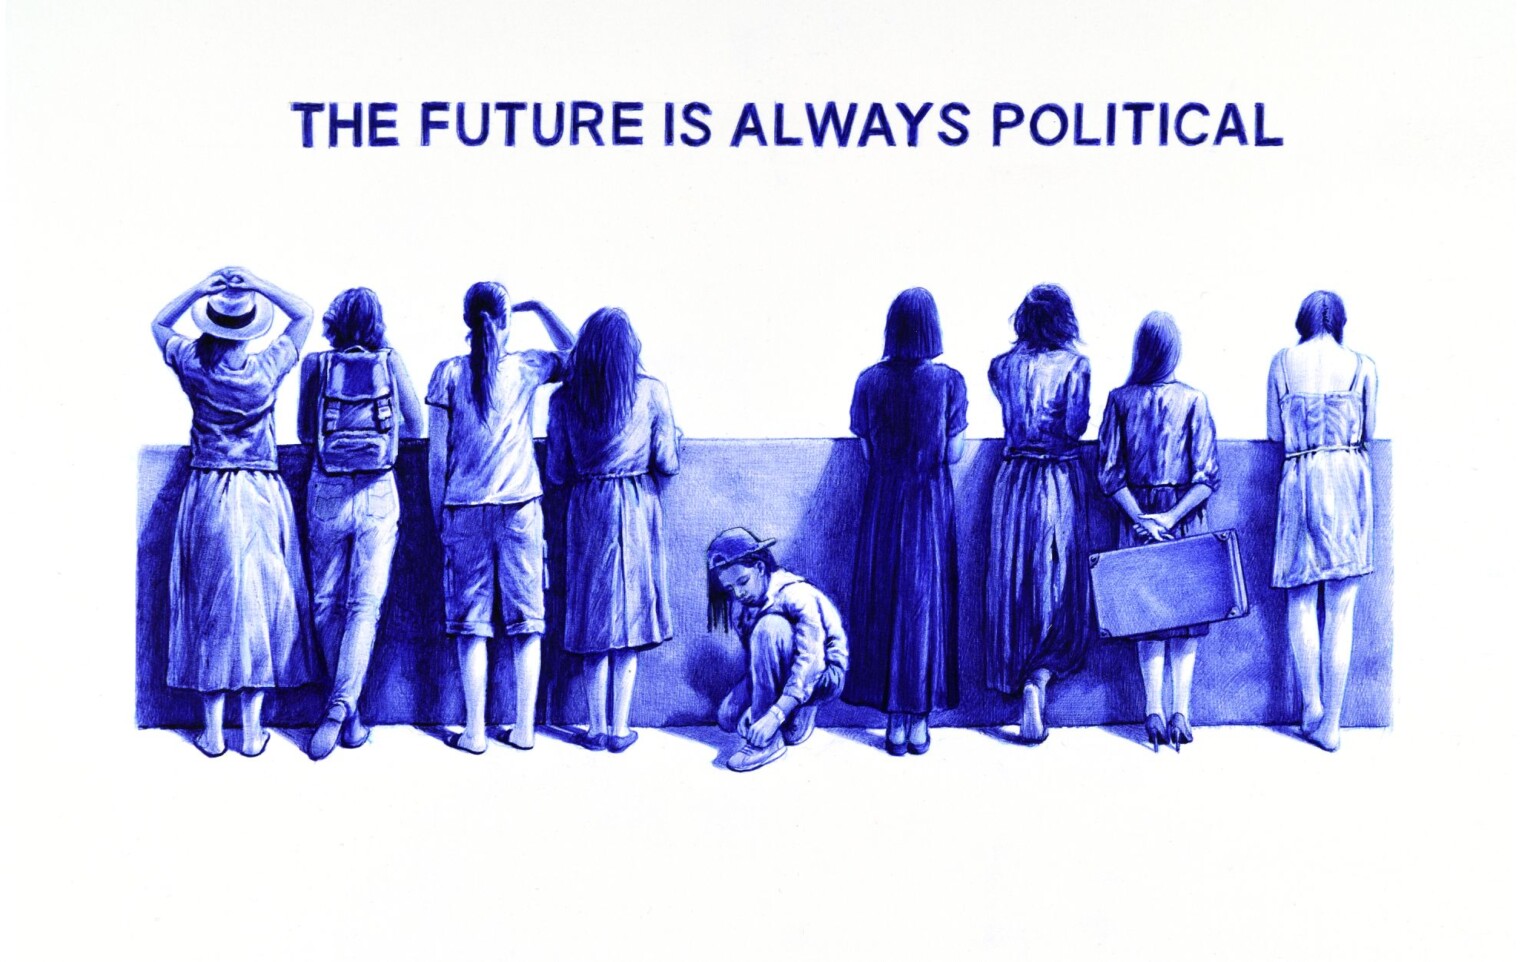 Giuseppe Stampone, The future is always political